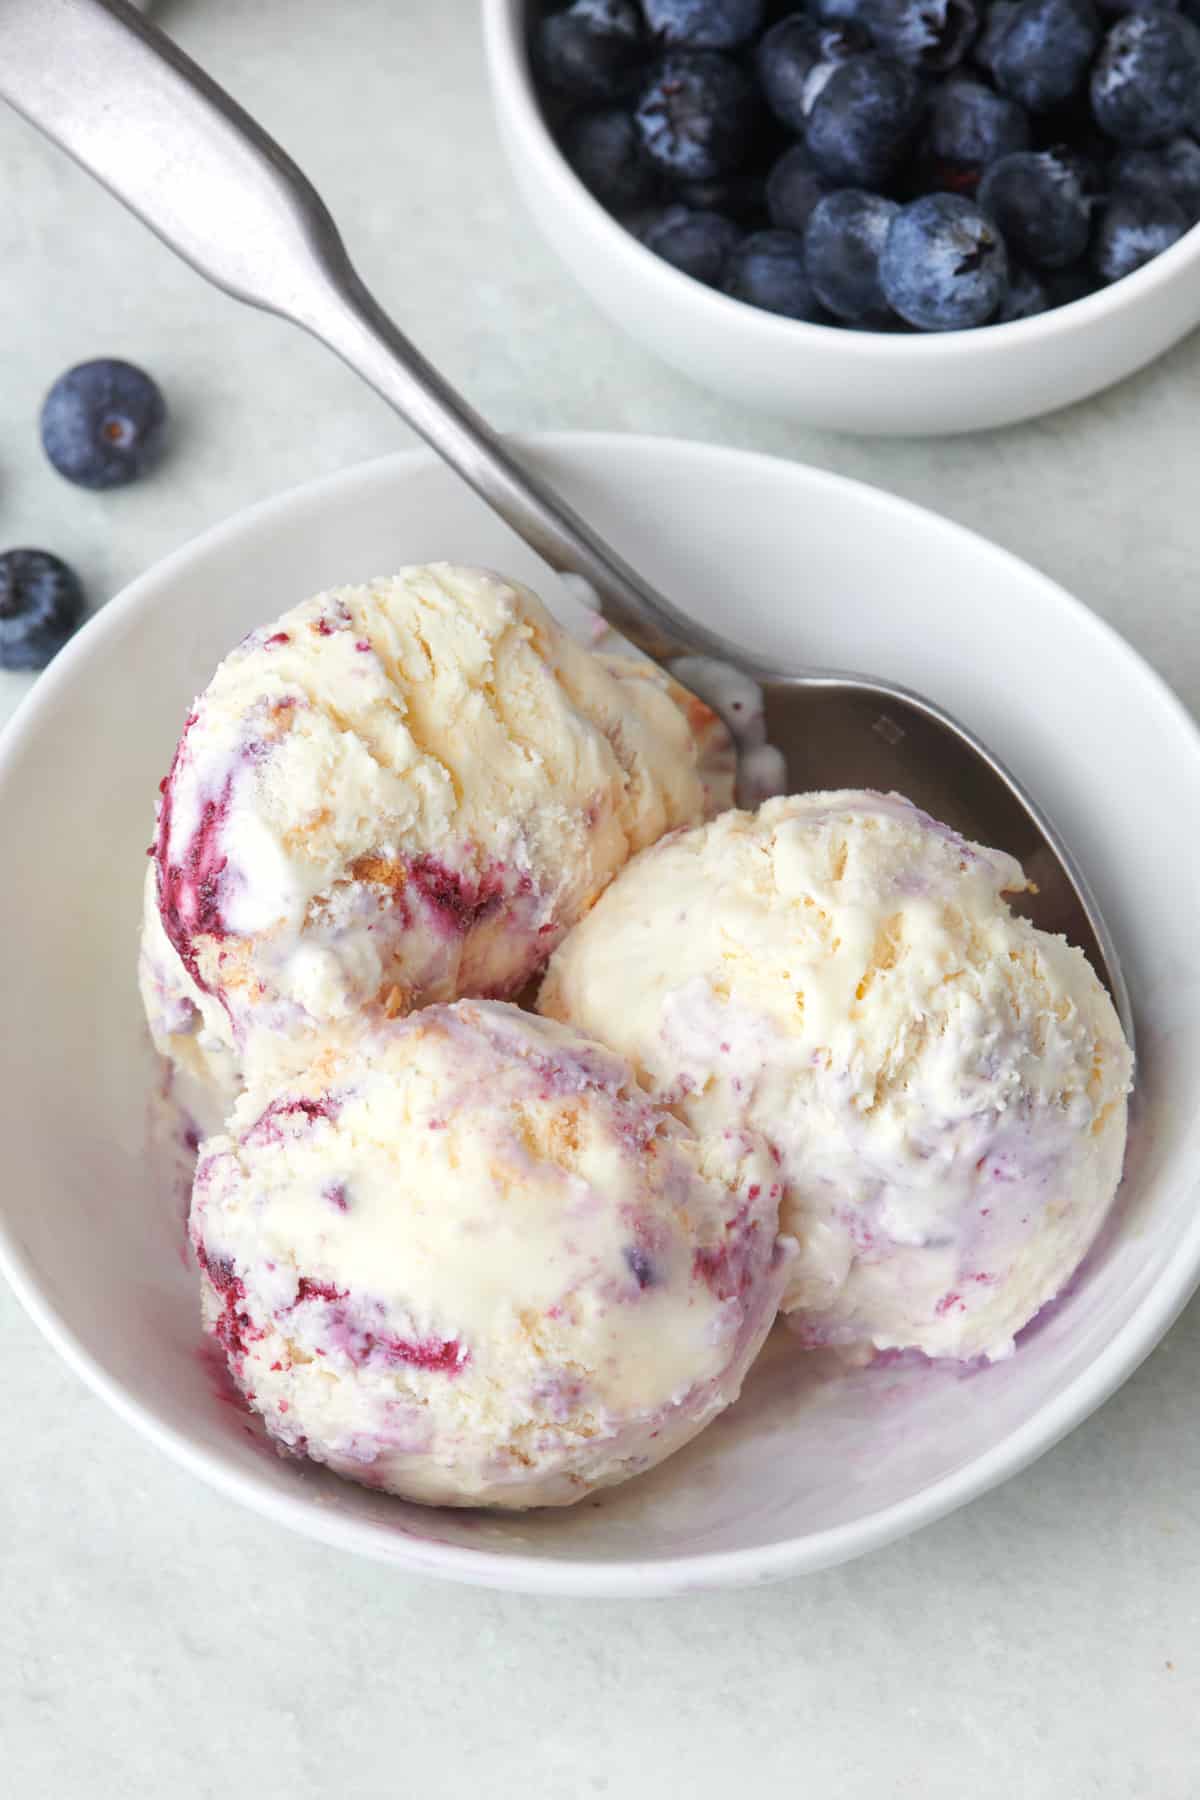 Three scoops of blueberry swirl ice cream in a bowl with a spoon dipped in and a fresh bowl of blueberries nearby.